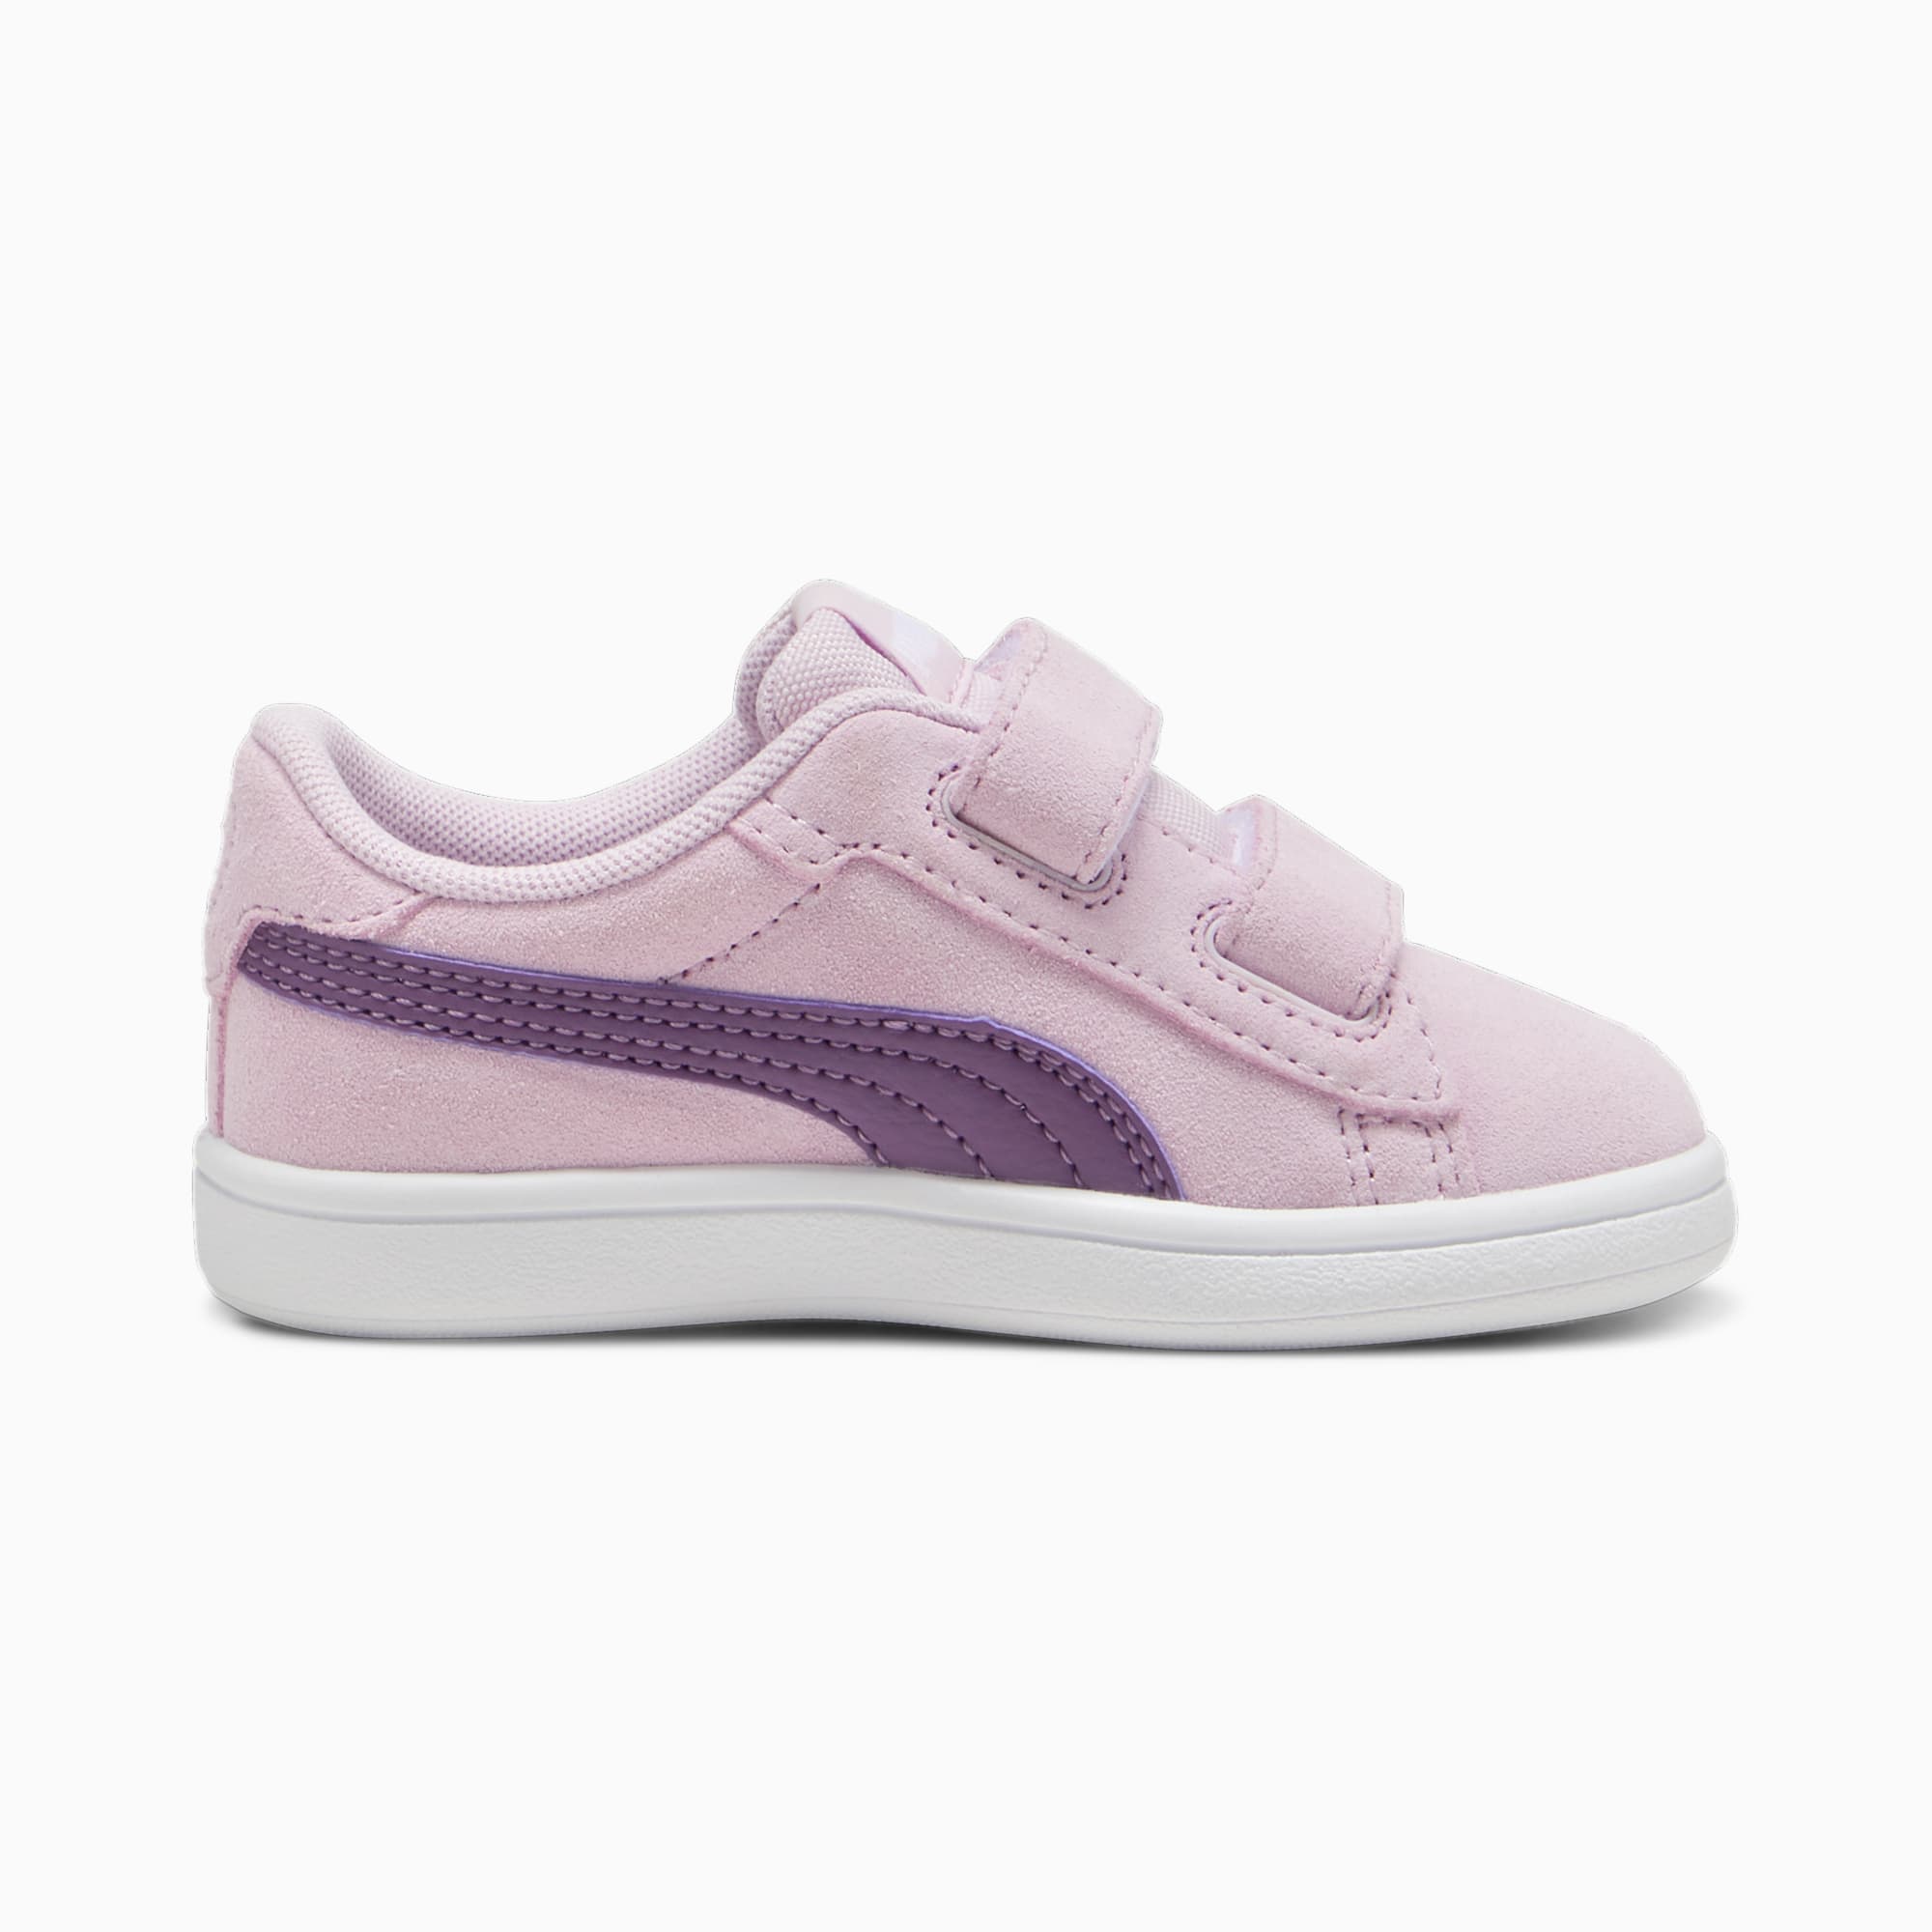 PUMA Smash 3.0 Suede Sneakers Baby, Grape Mist/Crushed Berry/White, Size 19, Shoes